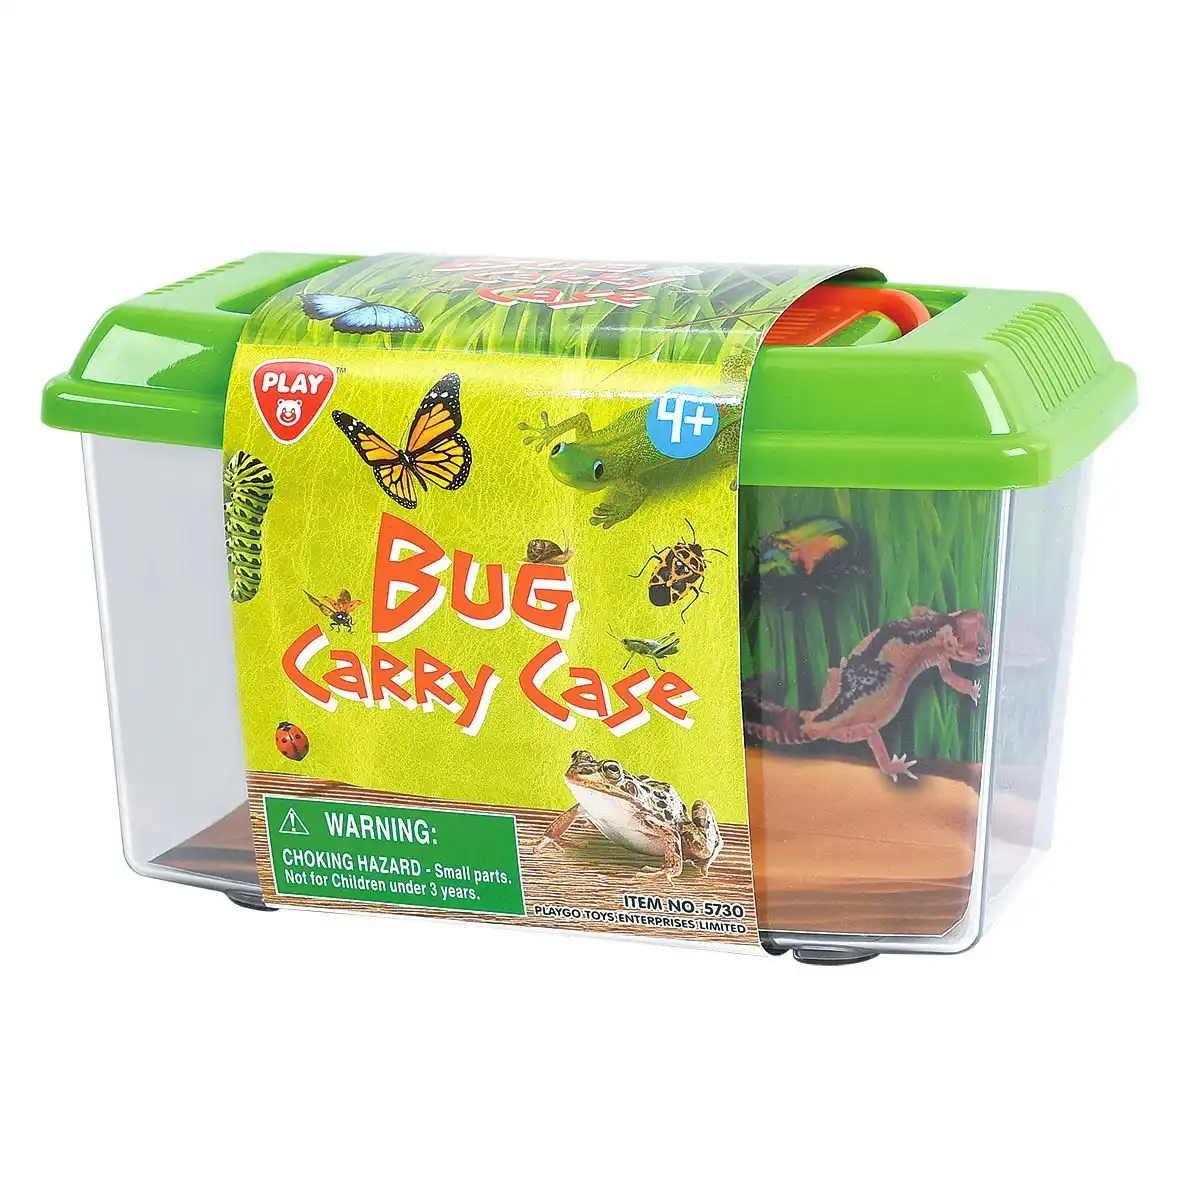 Bugs Carry Case  Playgo Toys Ent. Ltd